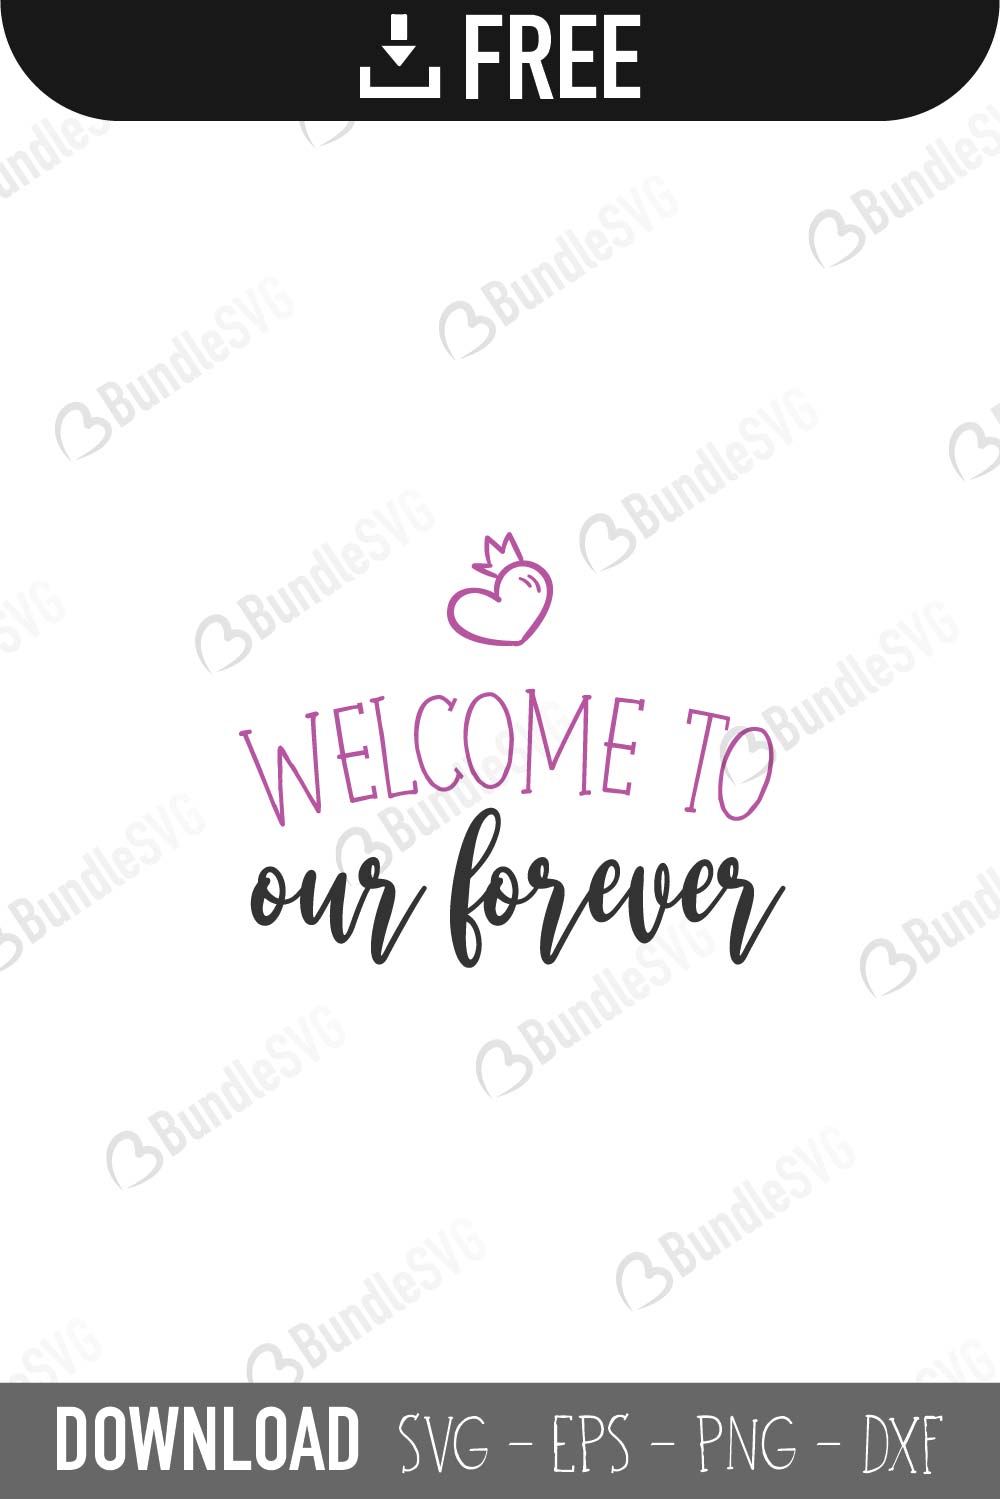 Download Cutting File Svg Dxf Eps Png Commercial Use Cut File Instant Download Wedding Svg Welcome To Our Forever Svg Clip Art Art Collectibles Delage Com Br